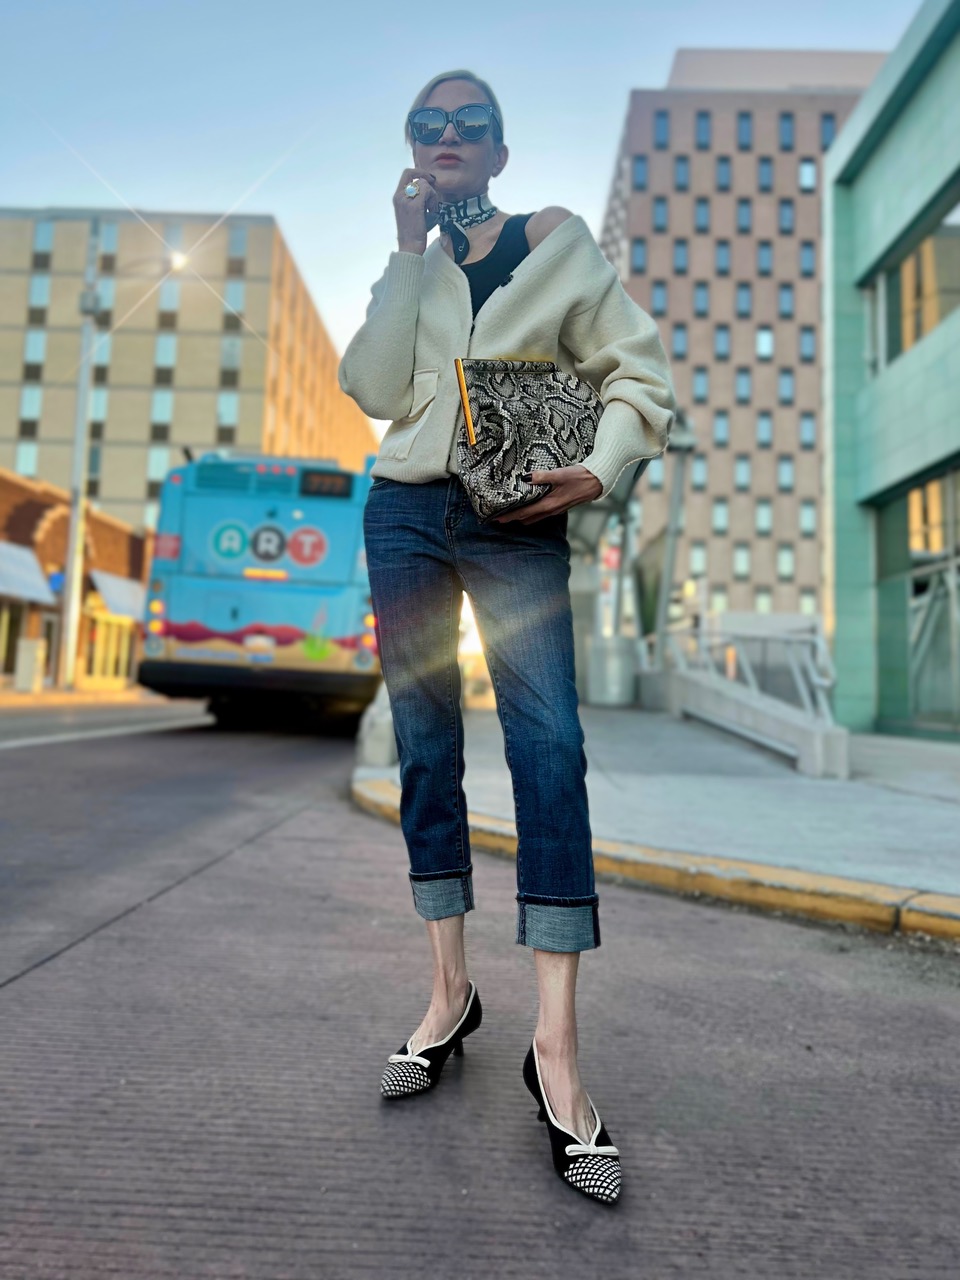 Lifestyle Influencer, Jamie Lewinger of More Than Turquoise the Natasha kitten heel from ViVaia Shoes 